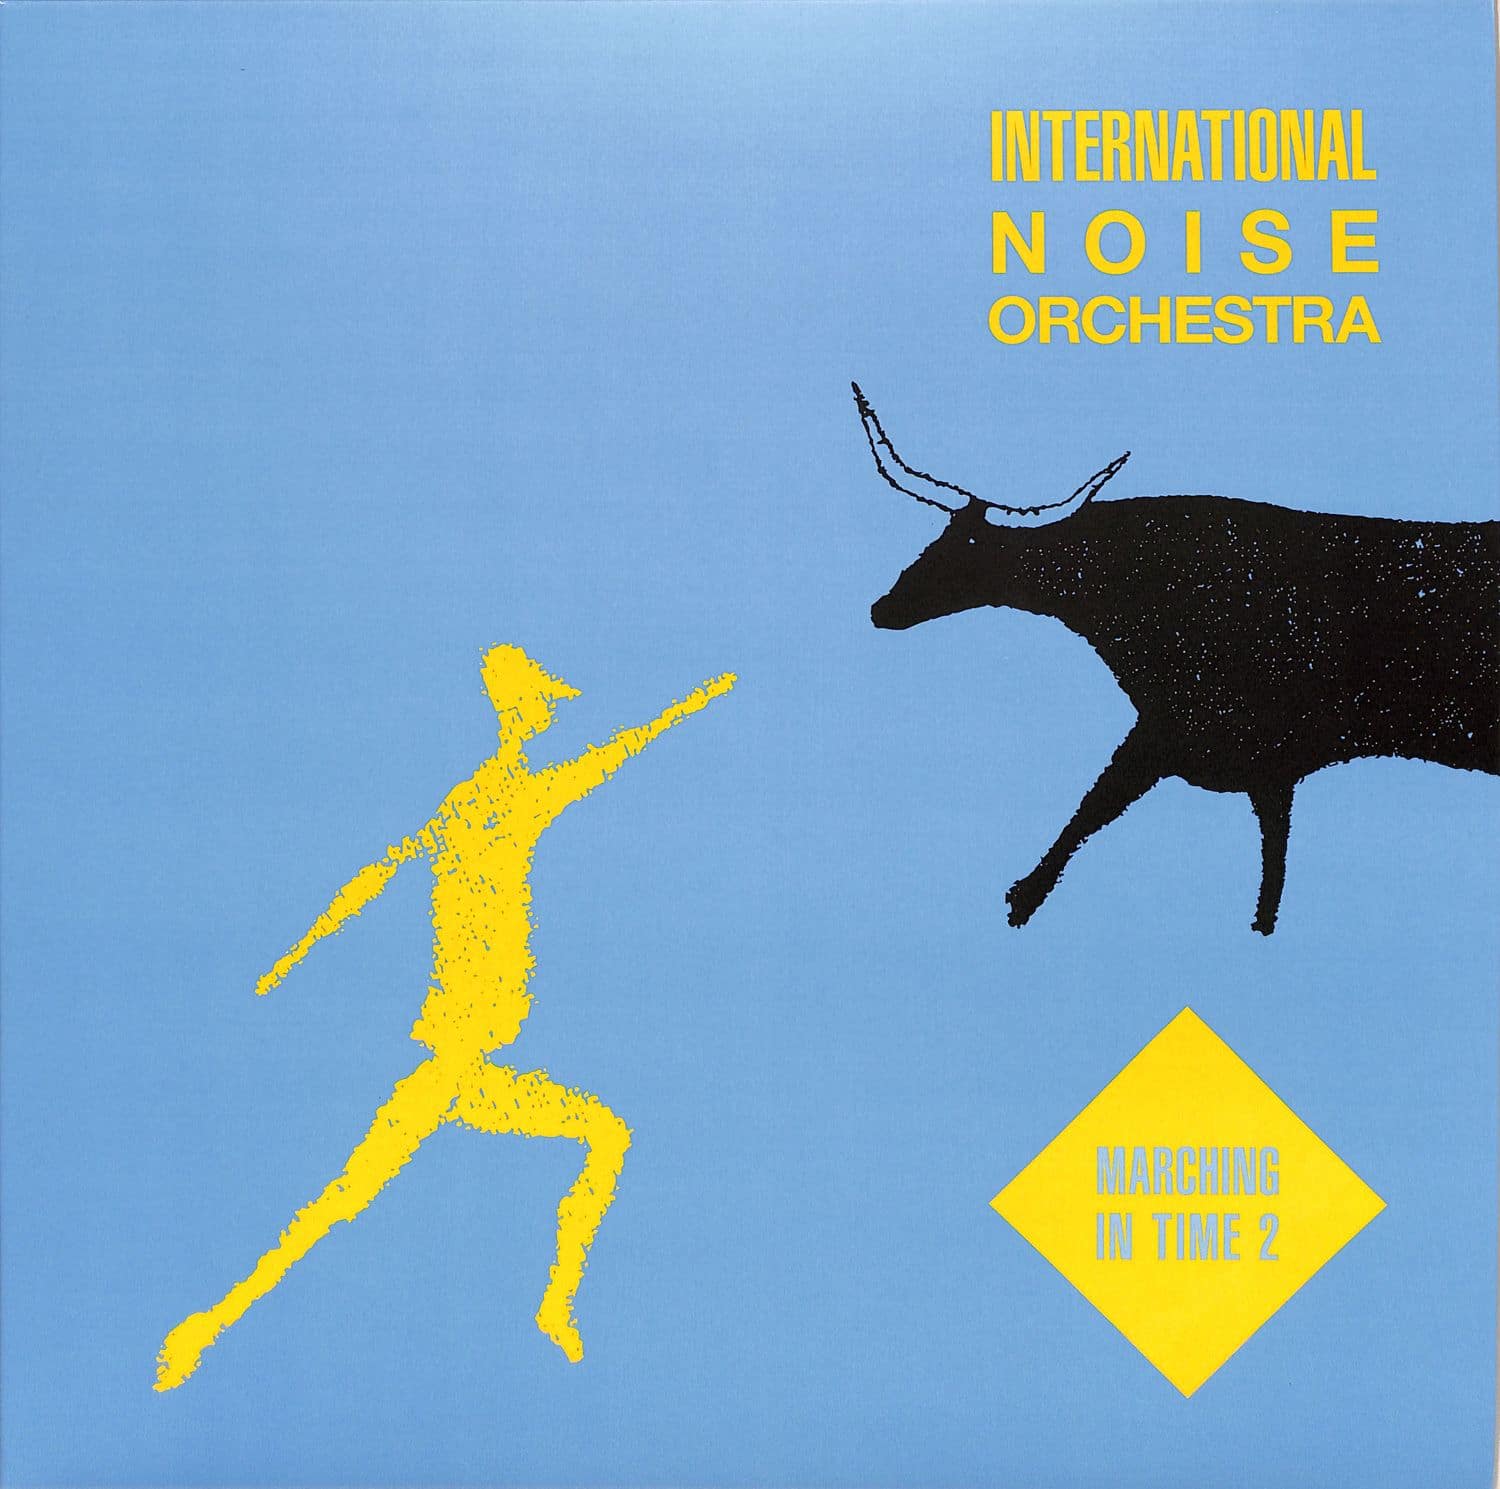 International Noise Orchestra - MARCHING IN TIME 2 